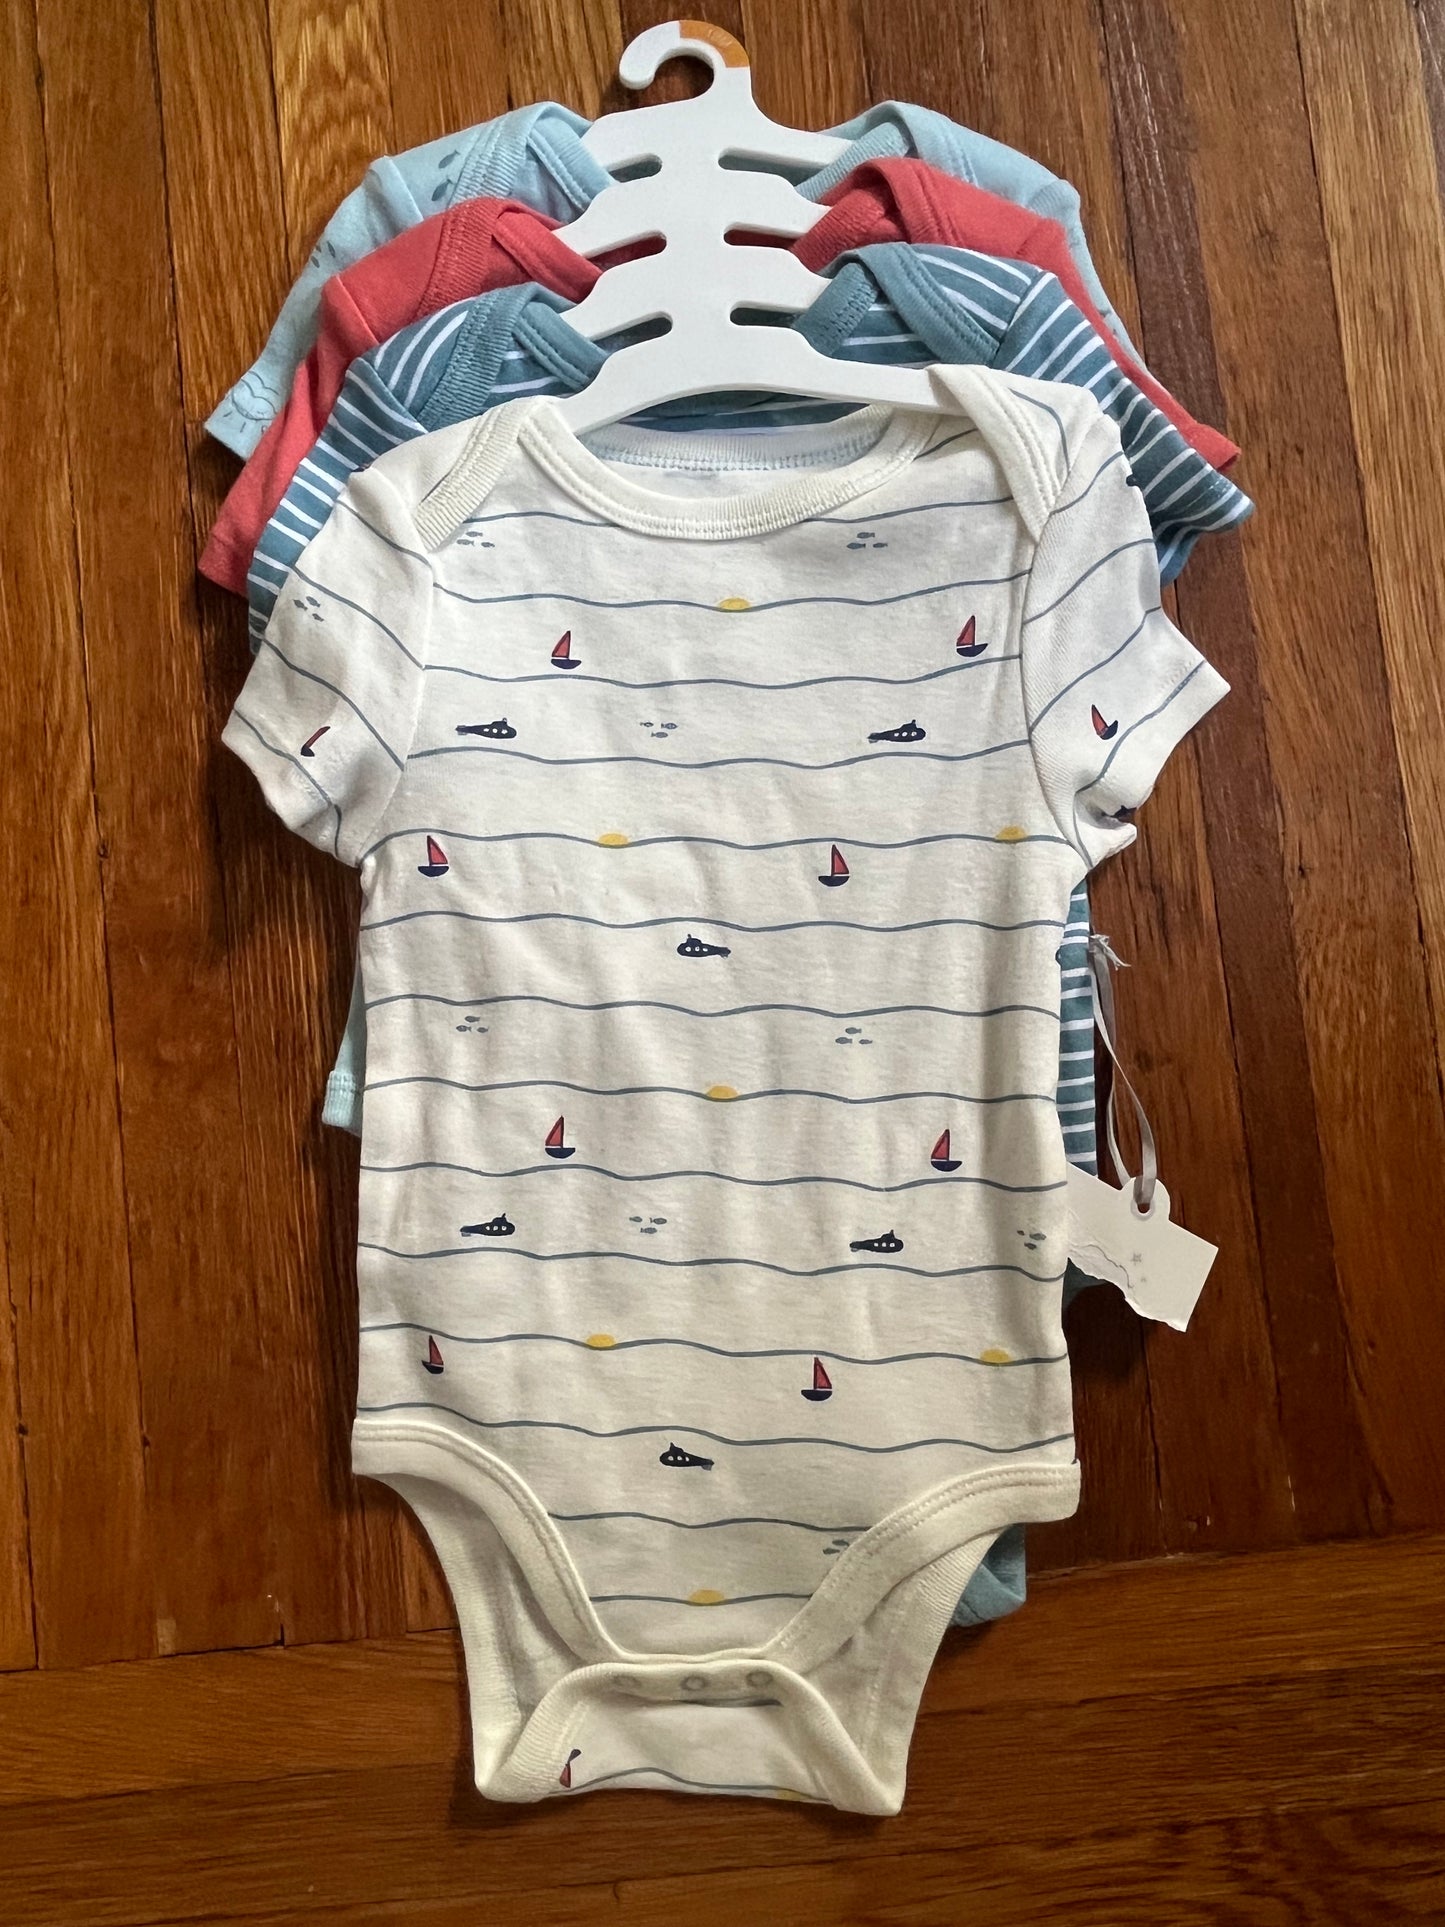 Cloud Island Boys Onesies 12 months  - NWTs- 4 in a pack